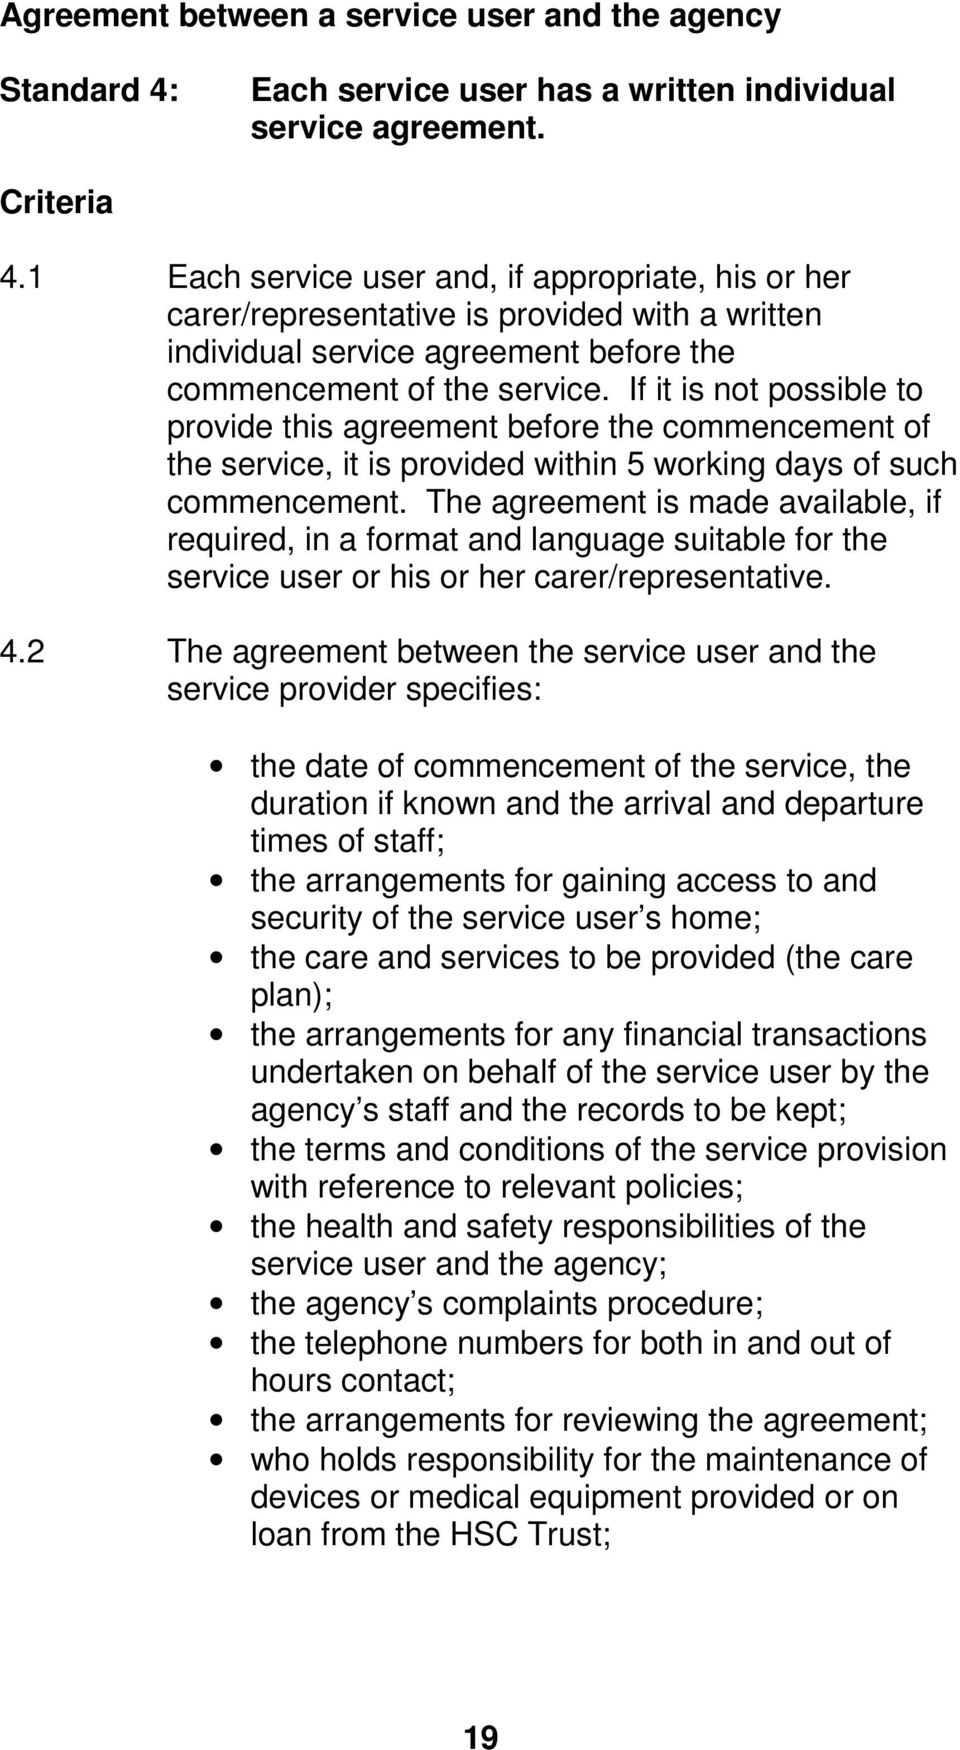 If it is not possible to provide this agreement before the commencement of the service, it is provided within 5 working days of such commencement.